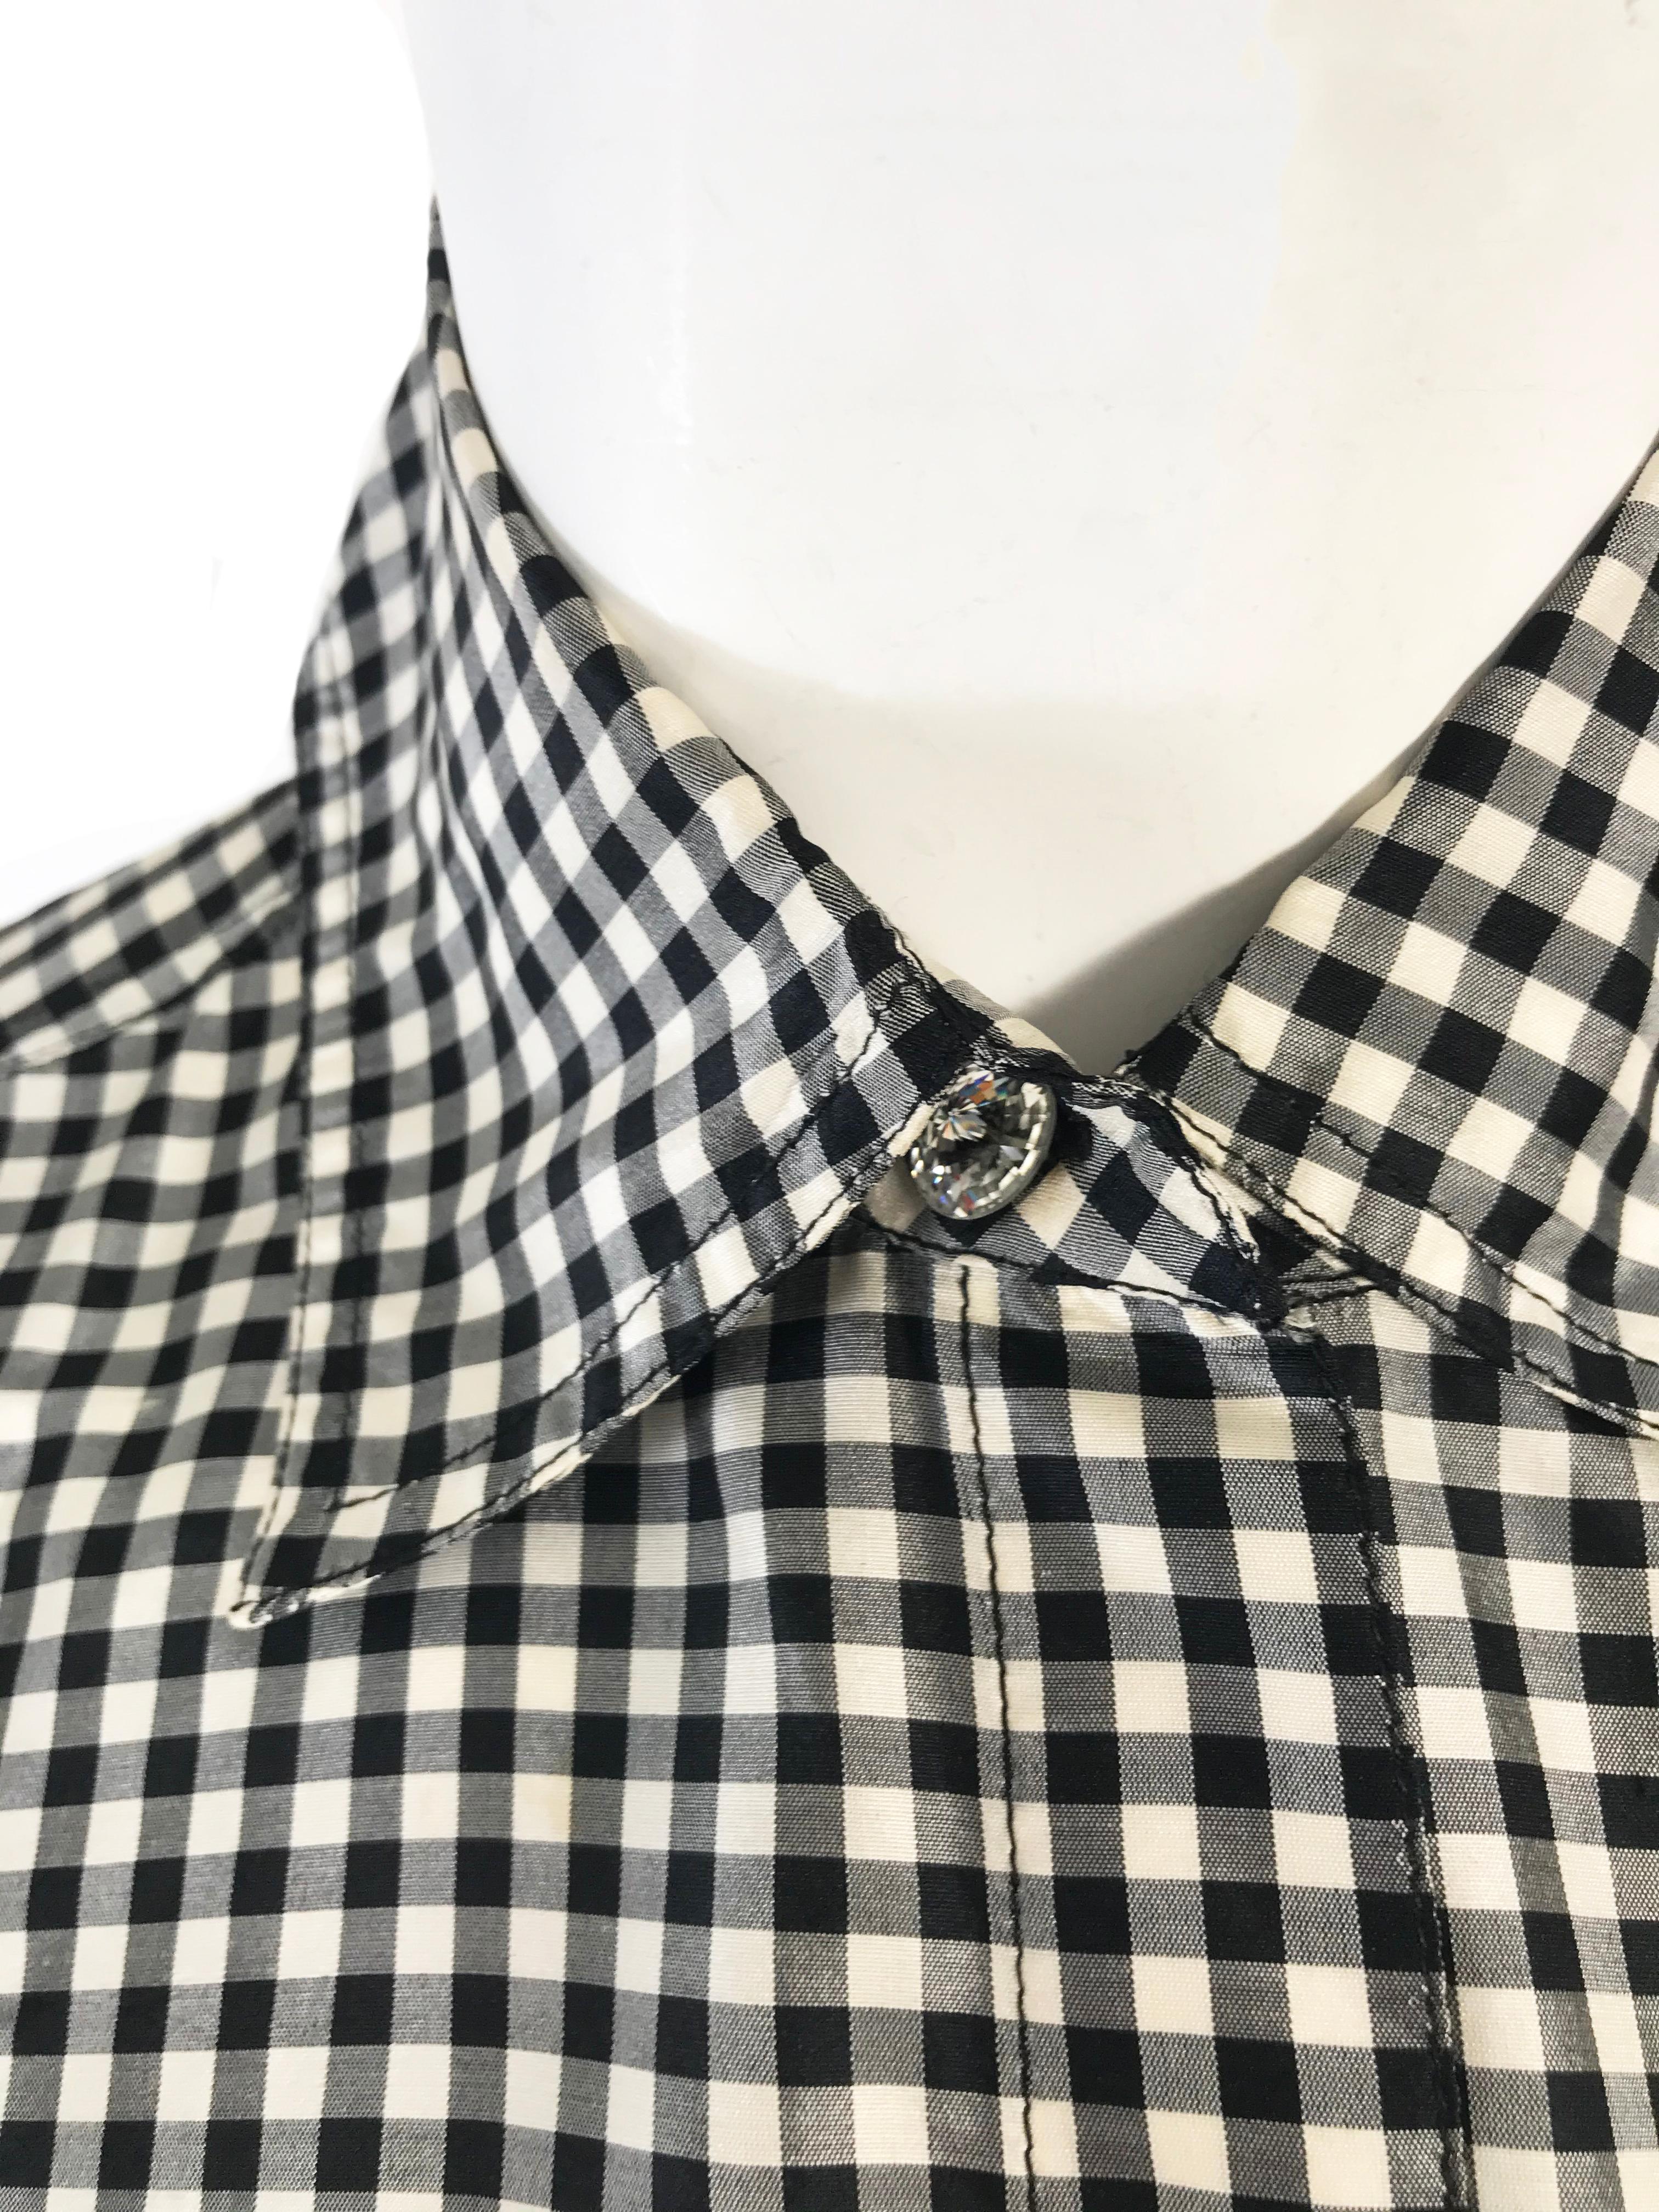 1990s iconic Isaac Mizrahi black and white check silk dress with rhinestone buttons. 
Made in USA
100% silk
Condition: Excellent
Size 4